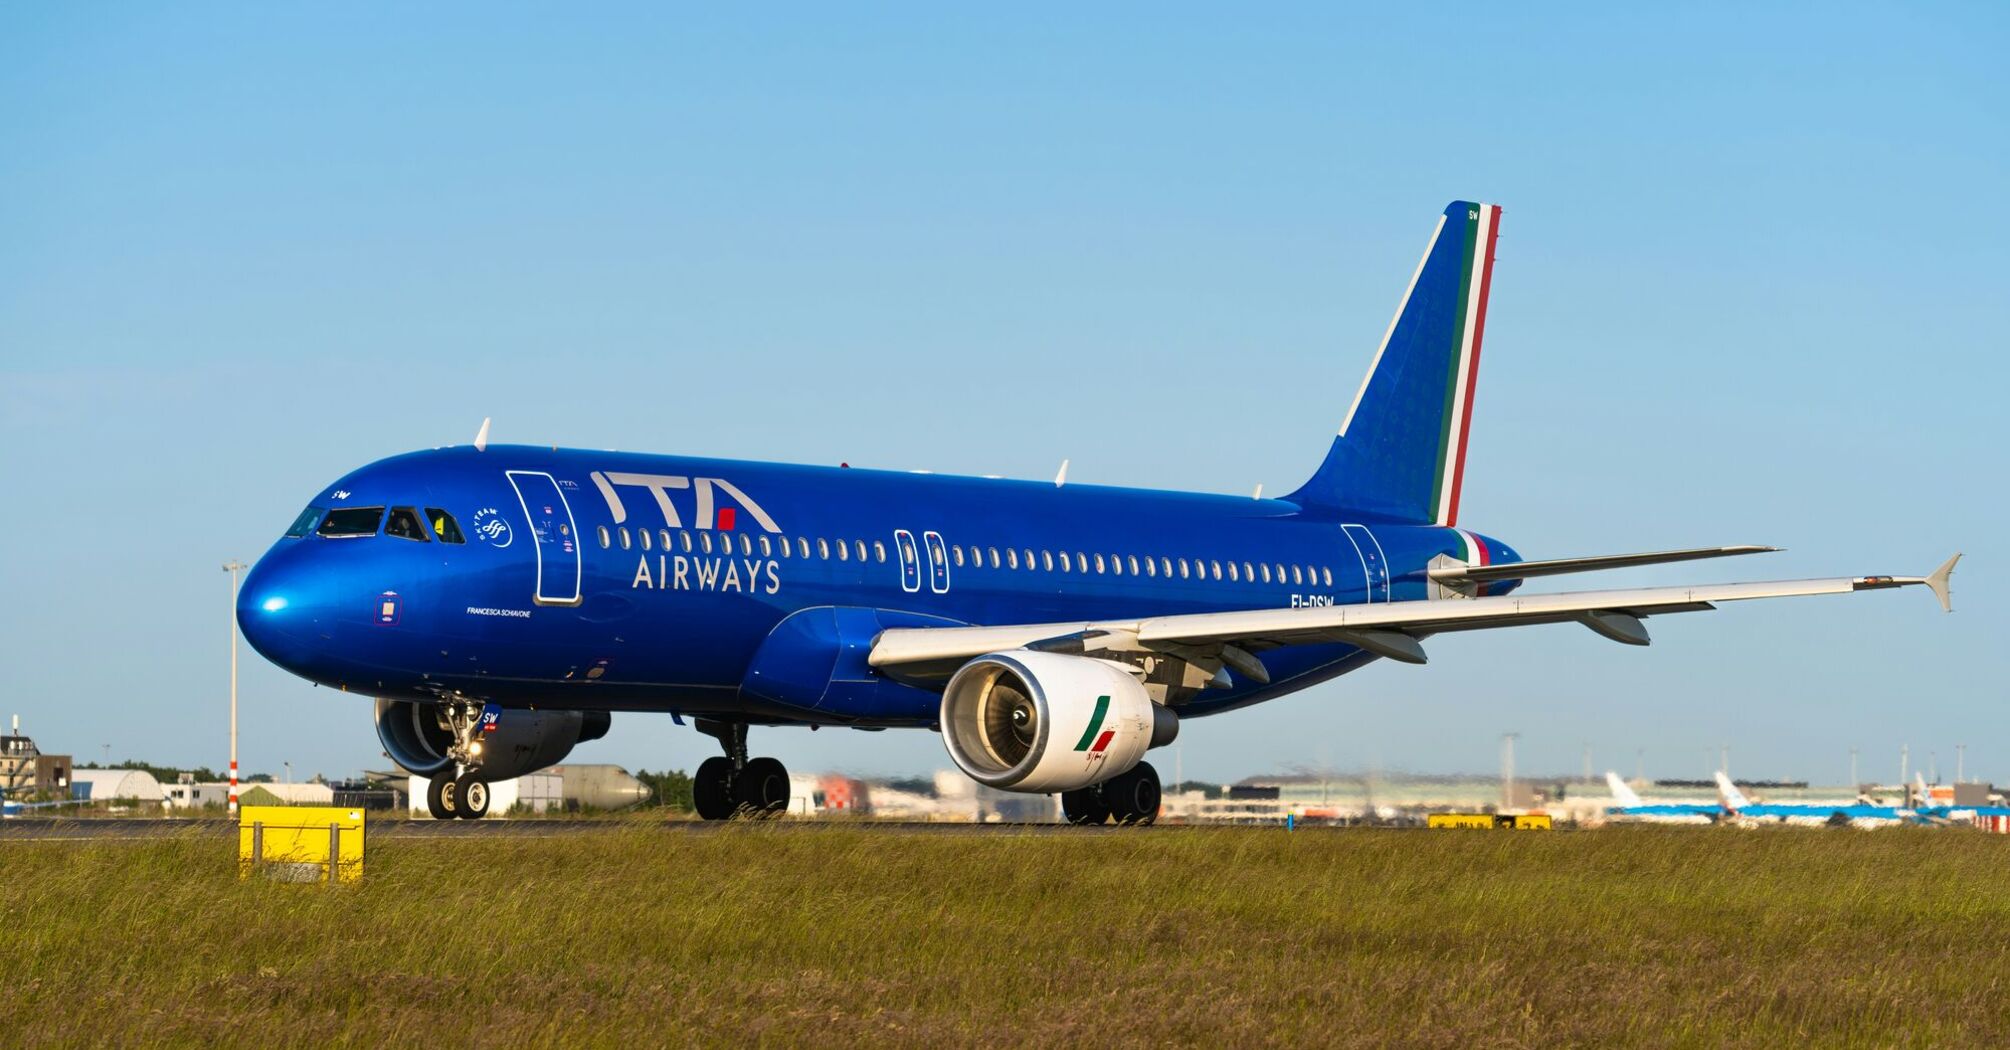 ITA Airways aircraft on the tarmac with blue livery and Italian flag on the tail 